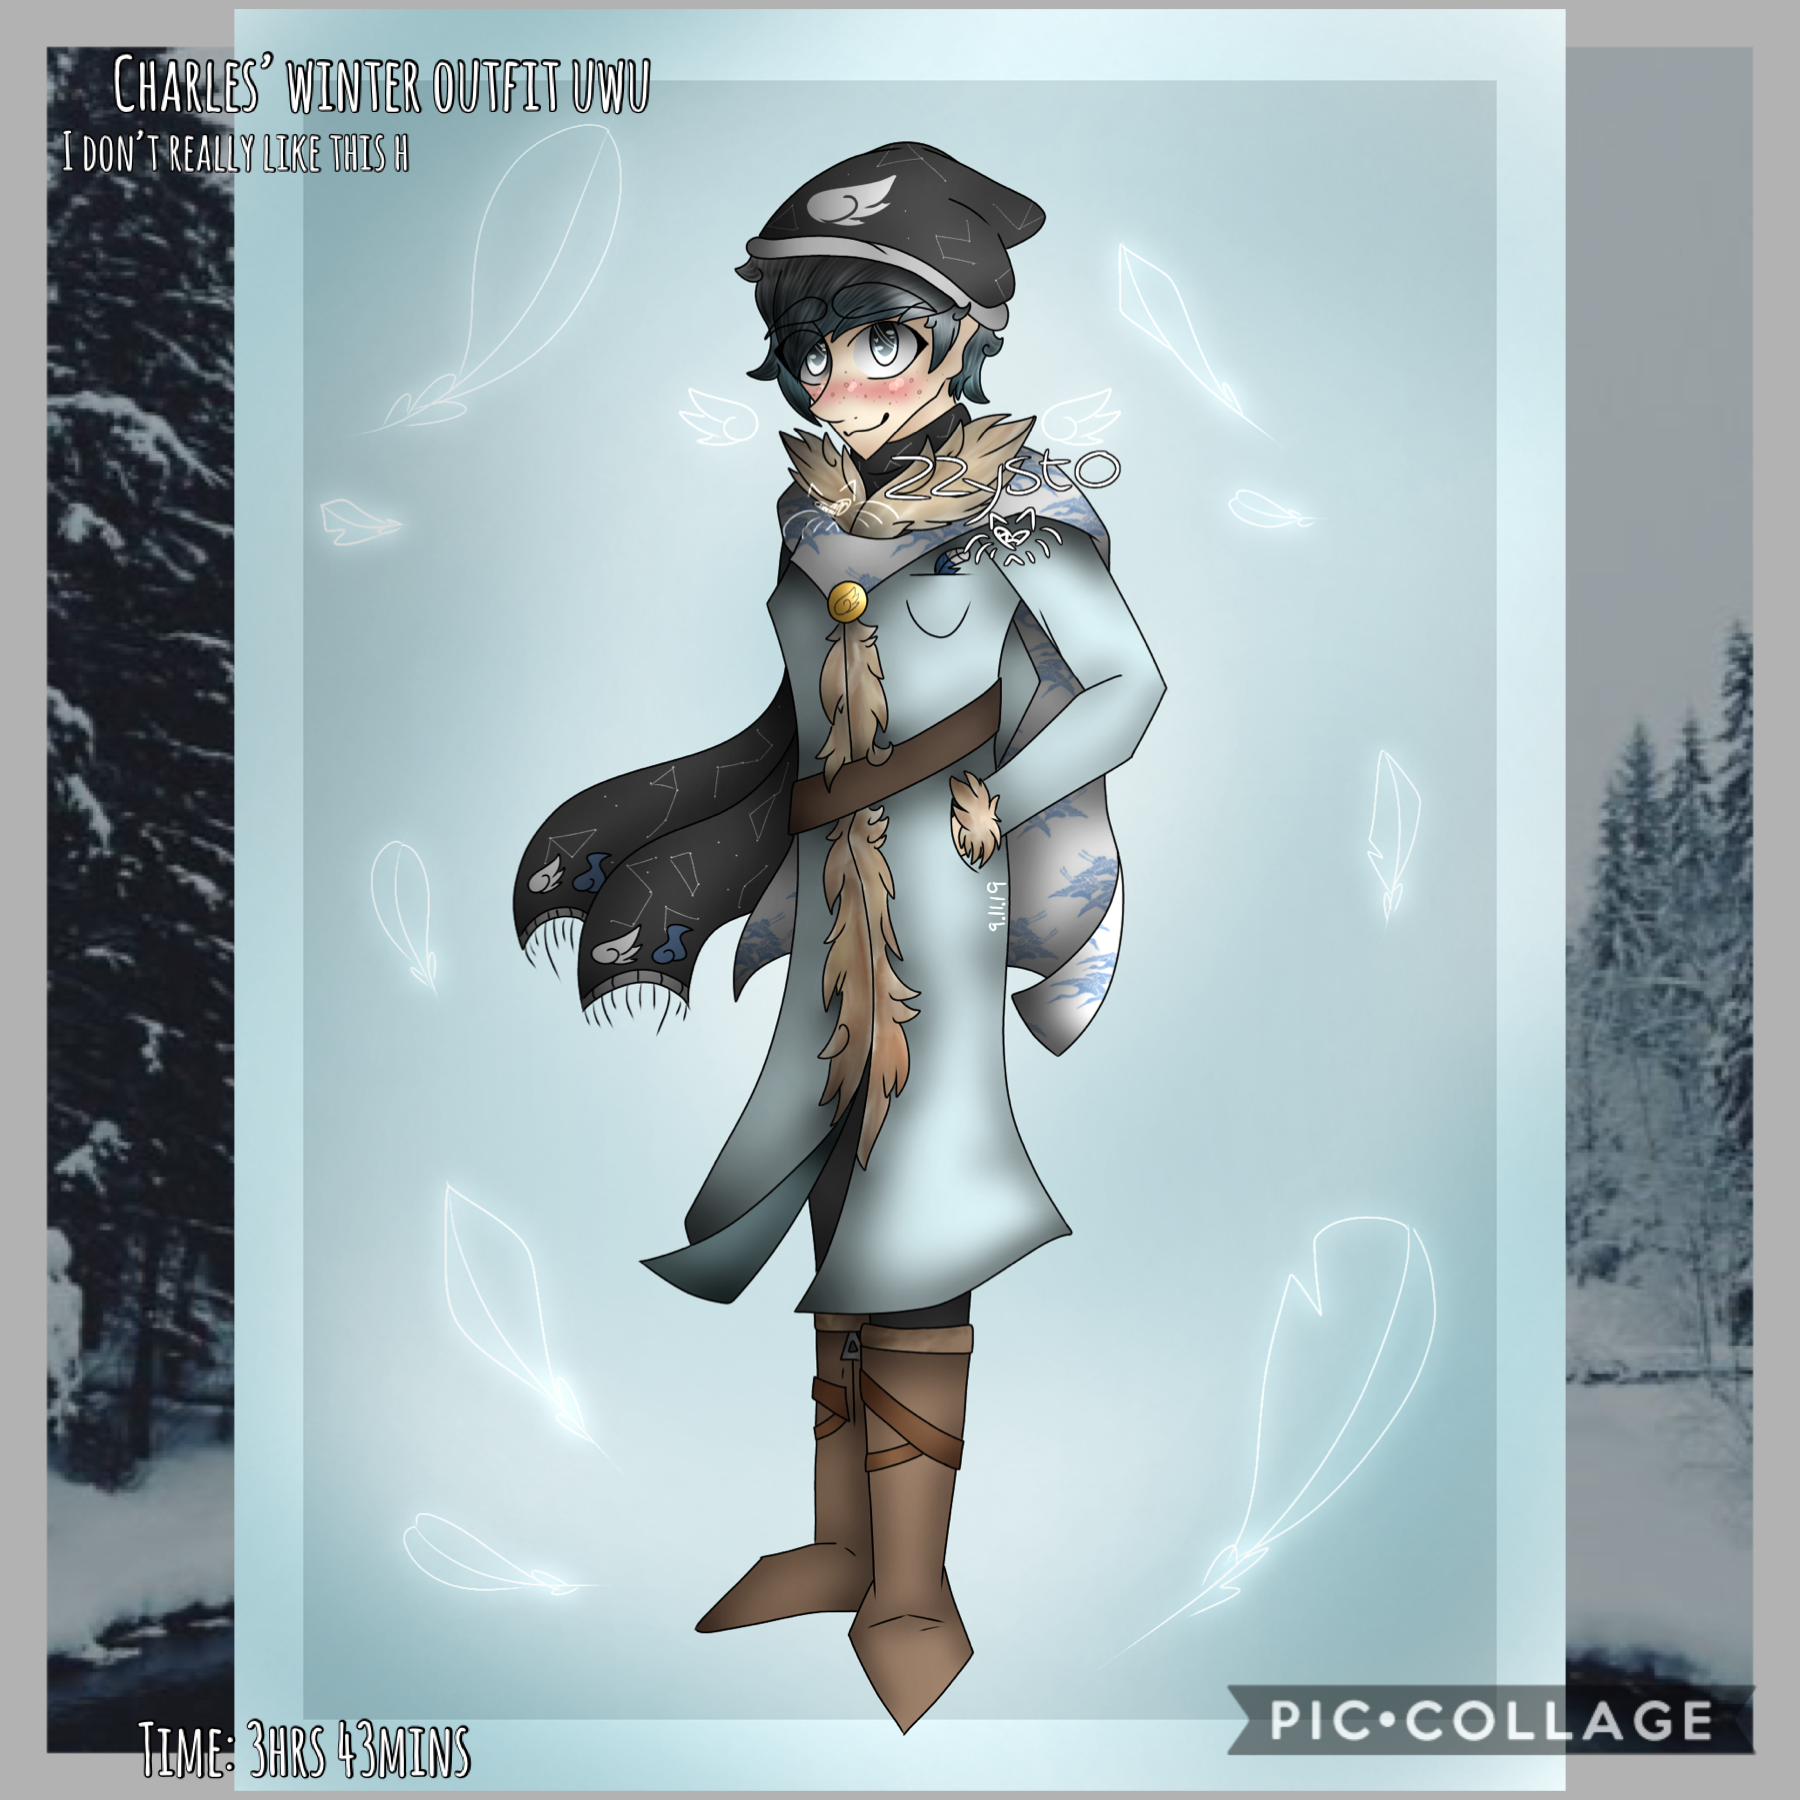 ❄️Tap❄️
I don’t like this but e h
I wanted to design Charles a winter outfit because I’m bad at drawing clothes and stuff, lol I really struggled with this :’)
oop I created a new oc and I really love him qwq